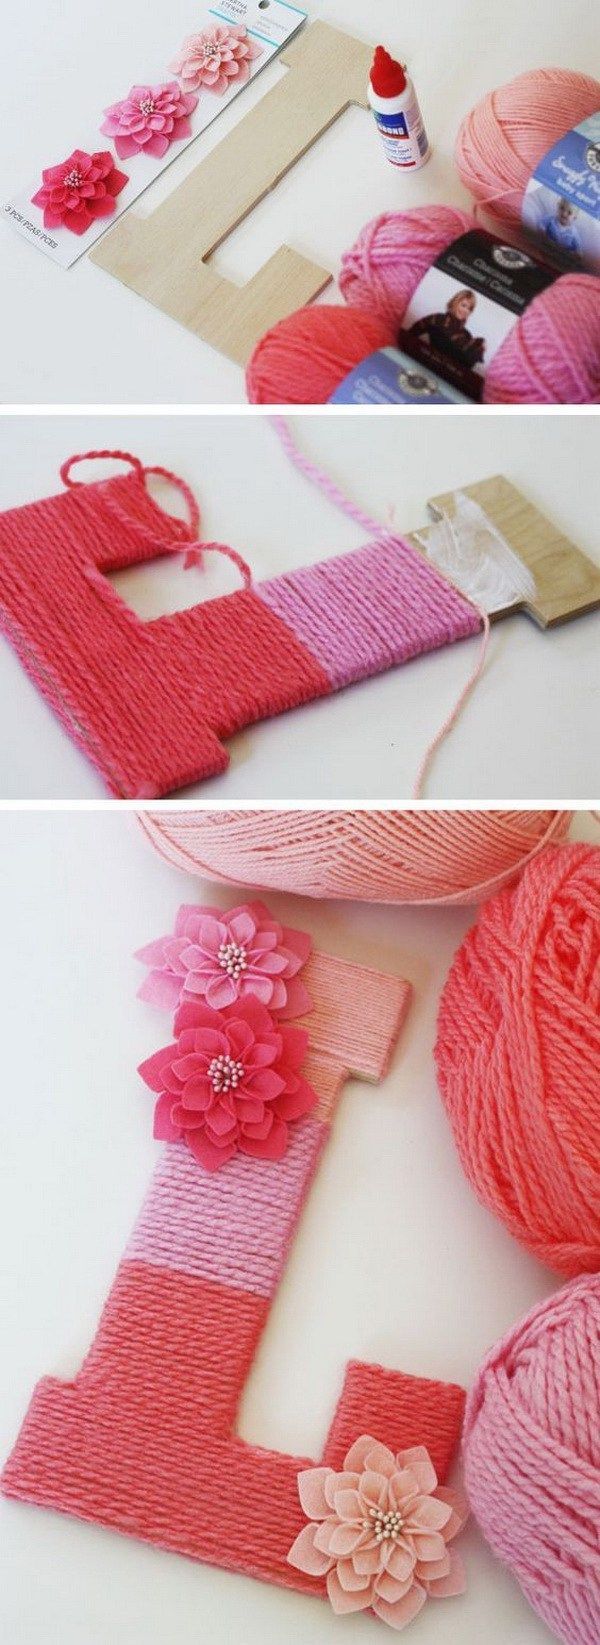 DIY Yarn Wrapped Ombre Monogram Letter: Make a decorative letter with leftover yarns. Would be a cute sign for your teen